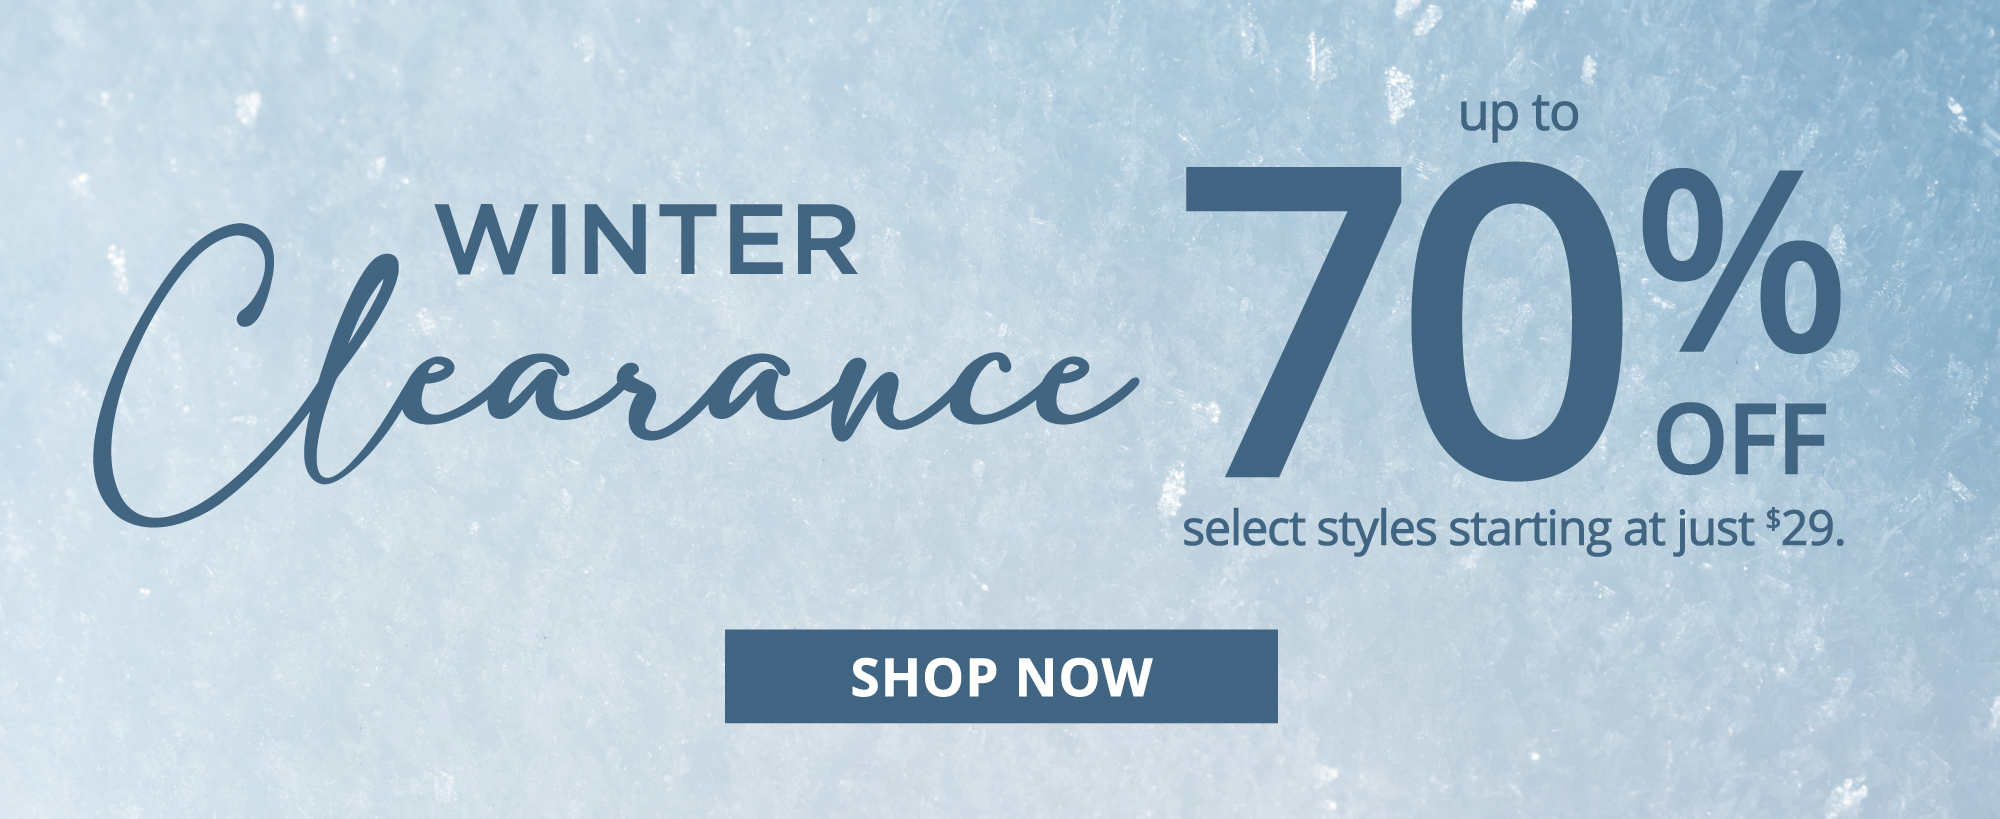 up to WINTER 70% OFF BT select styles starting at just *29. 